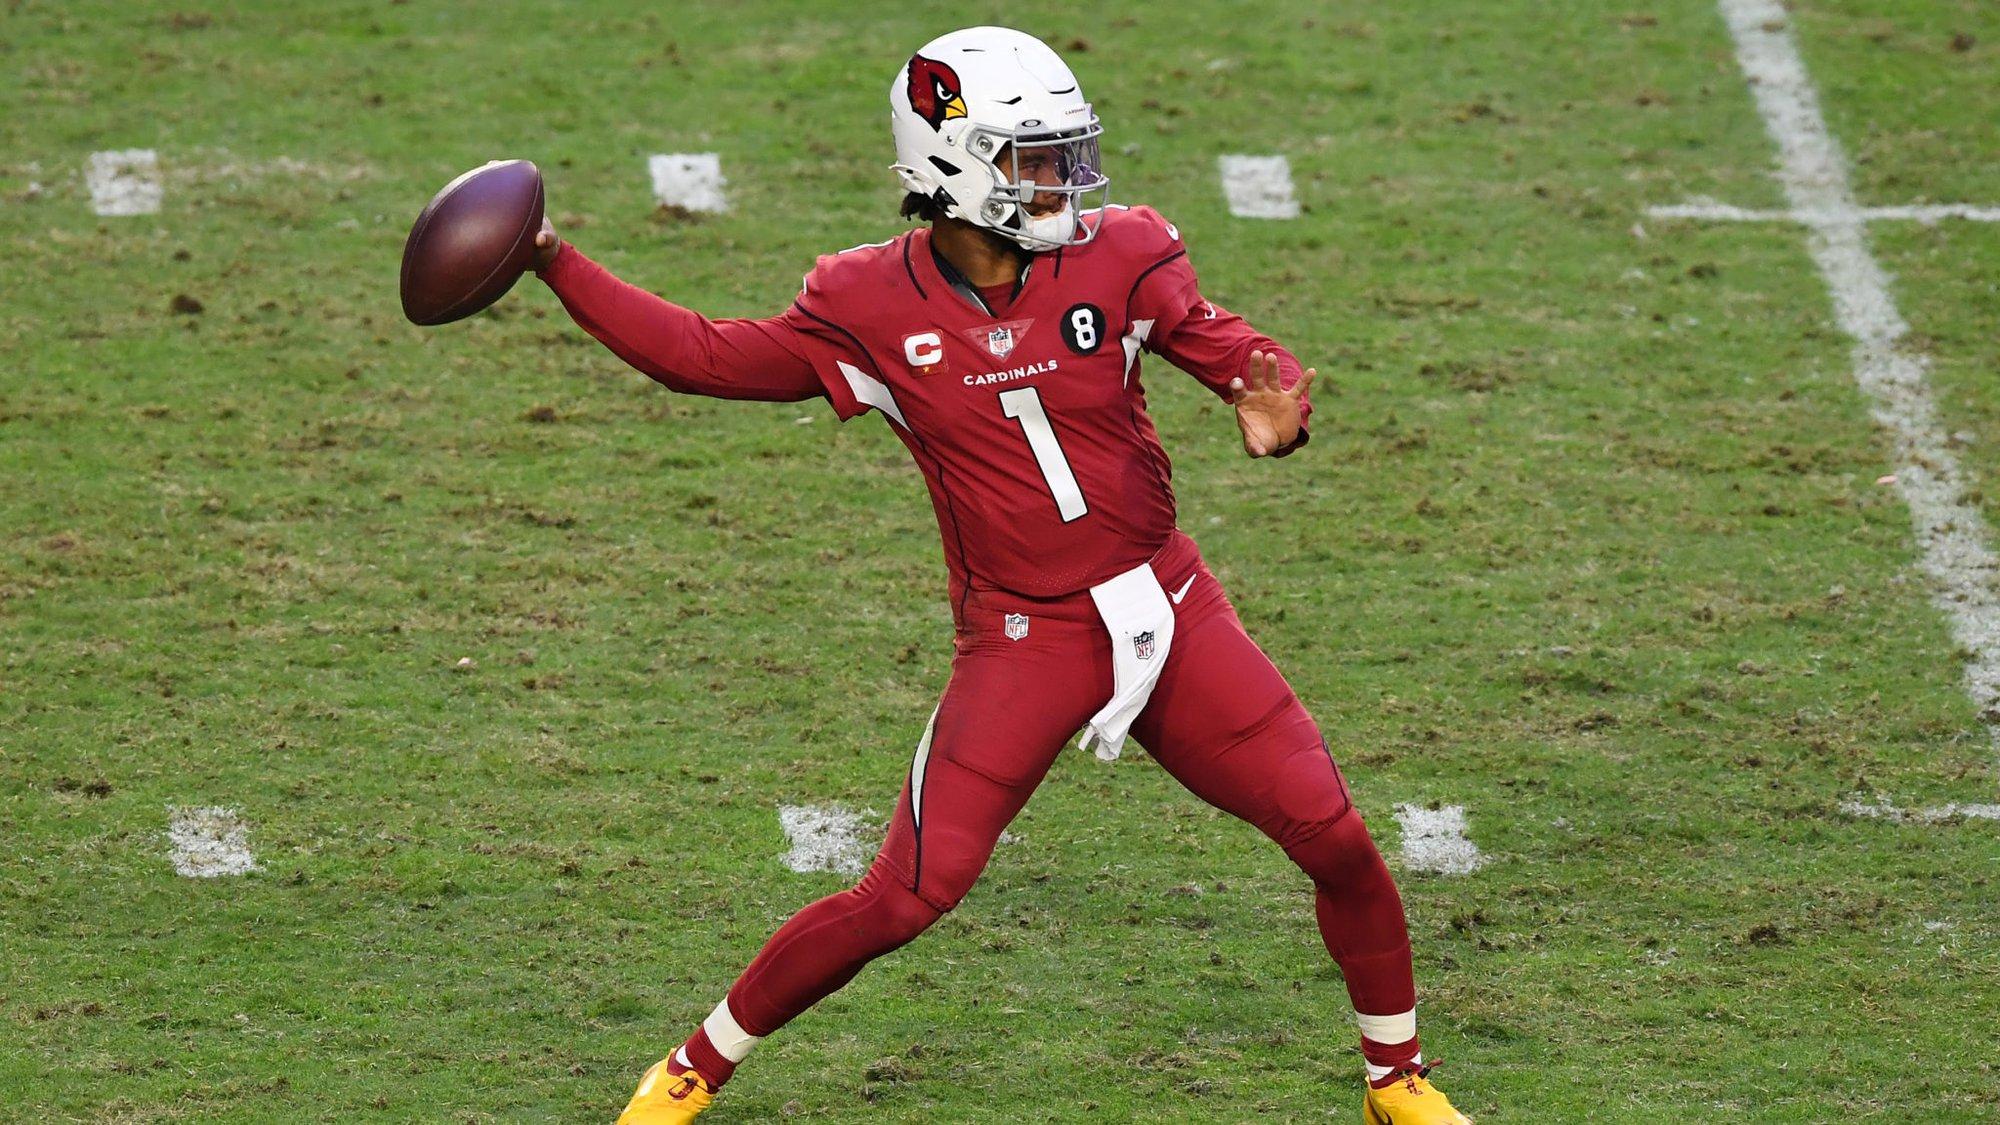 Los Angeles Rams vs Arizona Cardinals Betting Preview: Will the Cardinals Dominate the Rams Again to Keep Top Spot in the NFC?